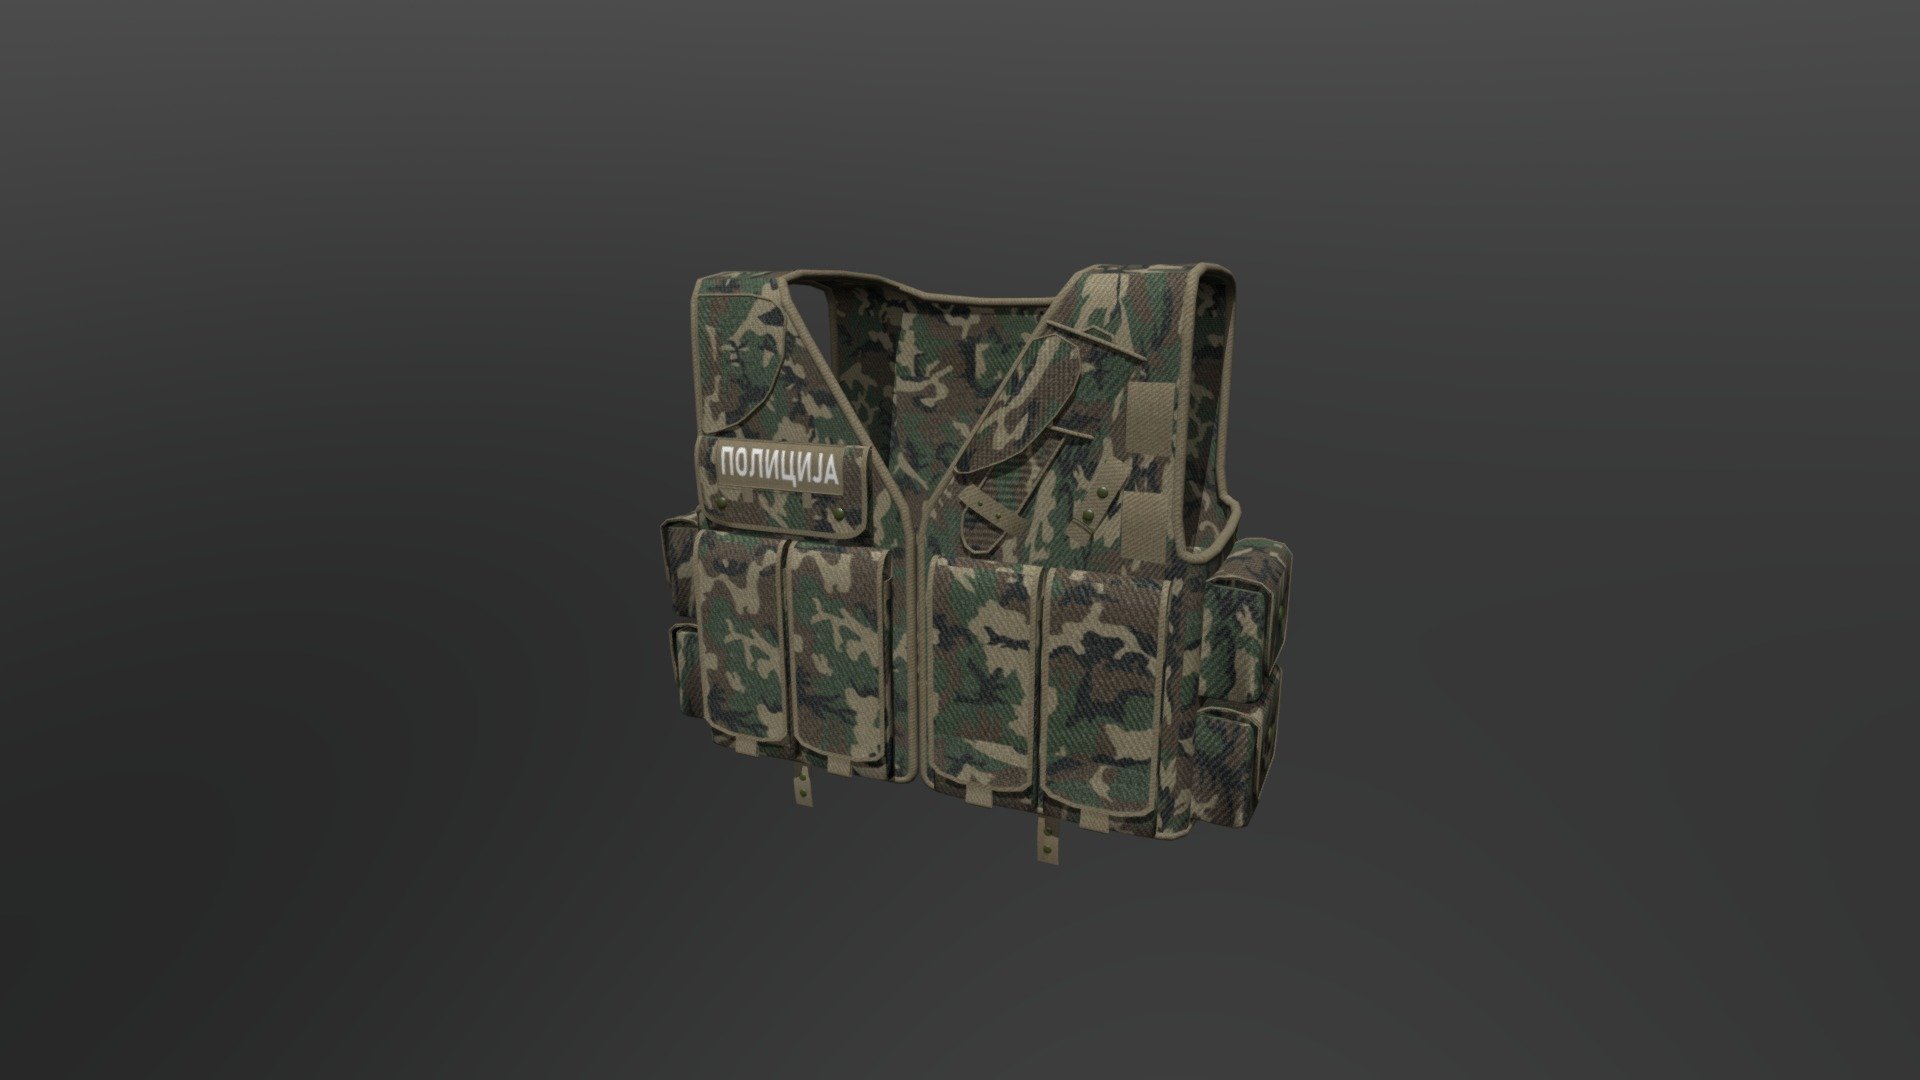 Roblox implementation of the 1999 MileDragic Sumadinac vest - MileDragic "Sumadinac" vest - 3D model by Alex7021 3d model